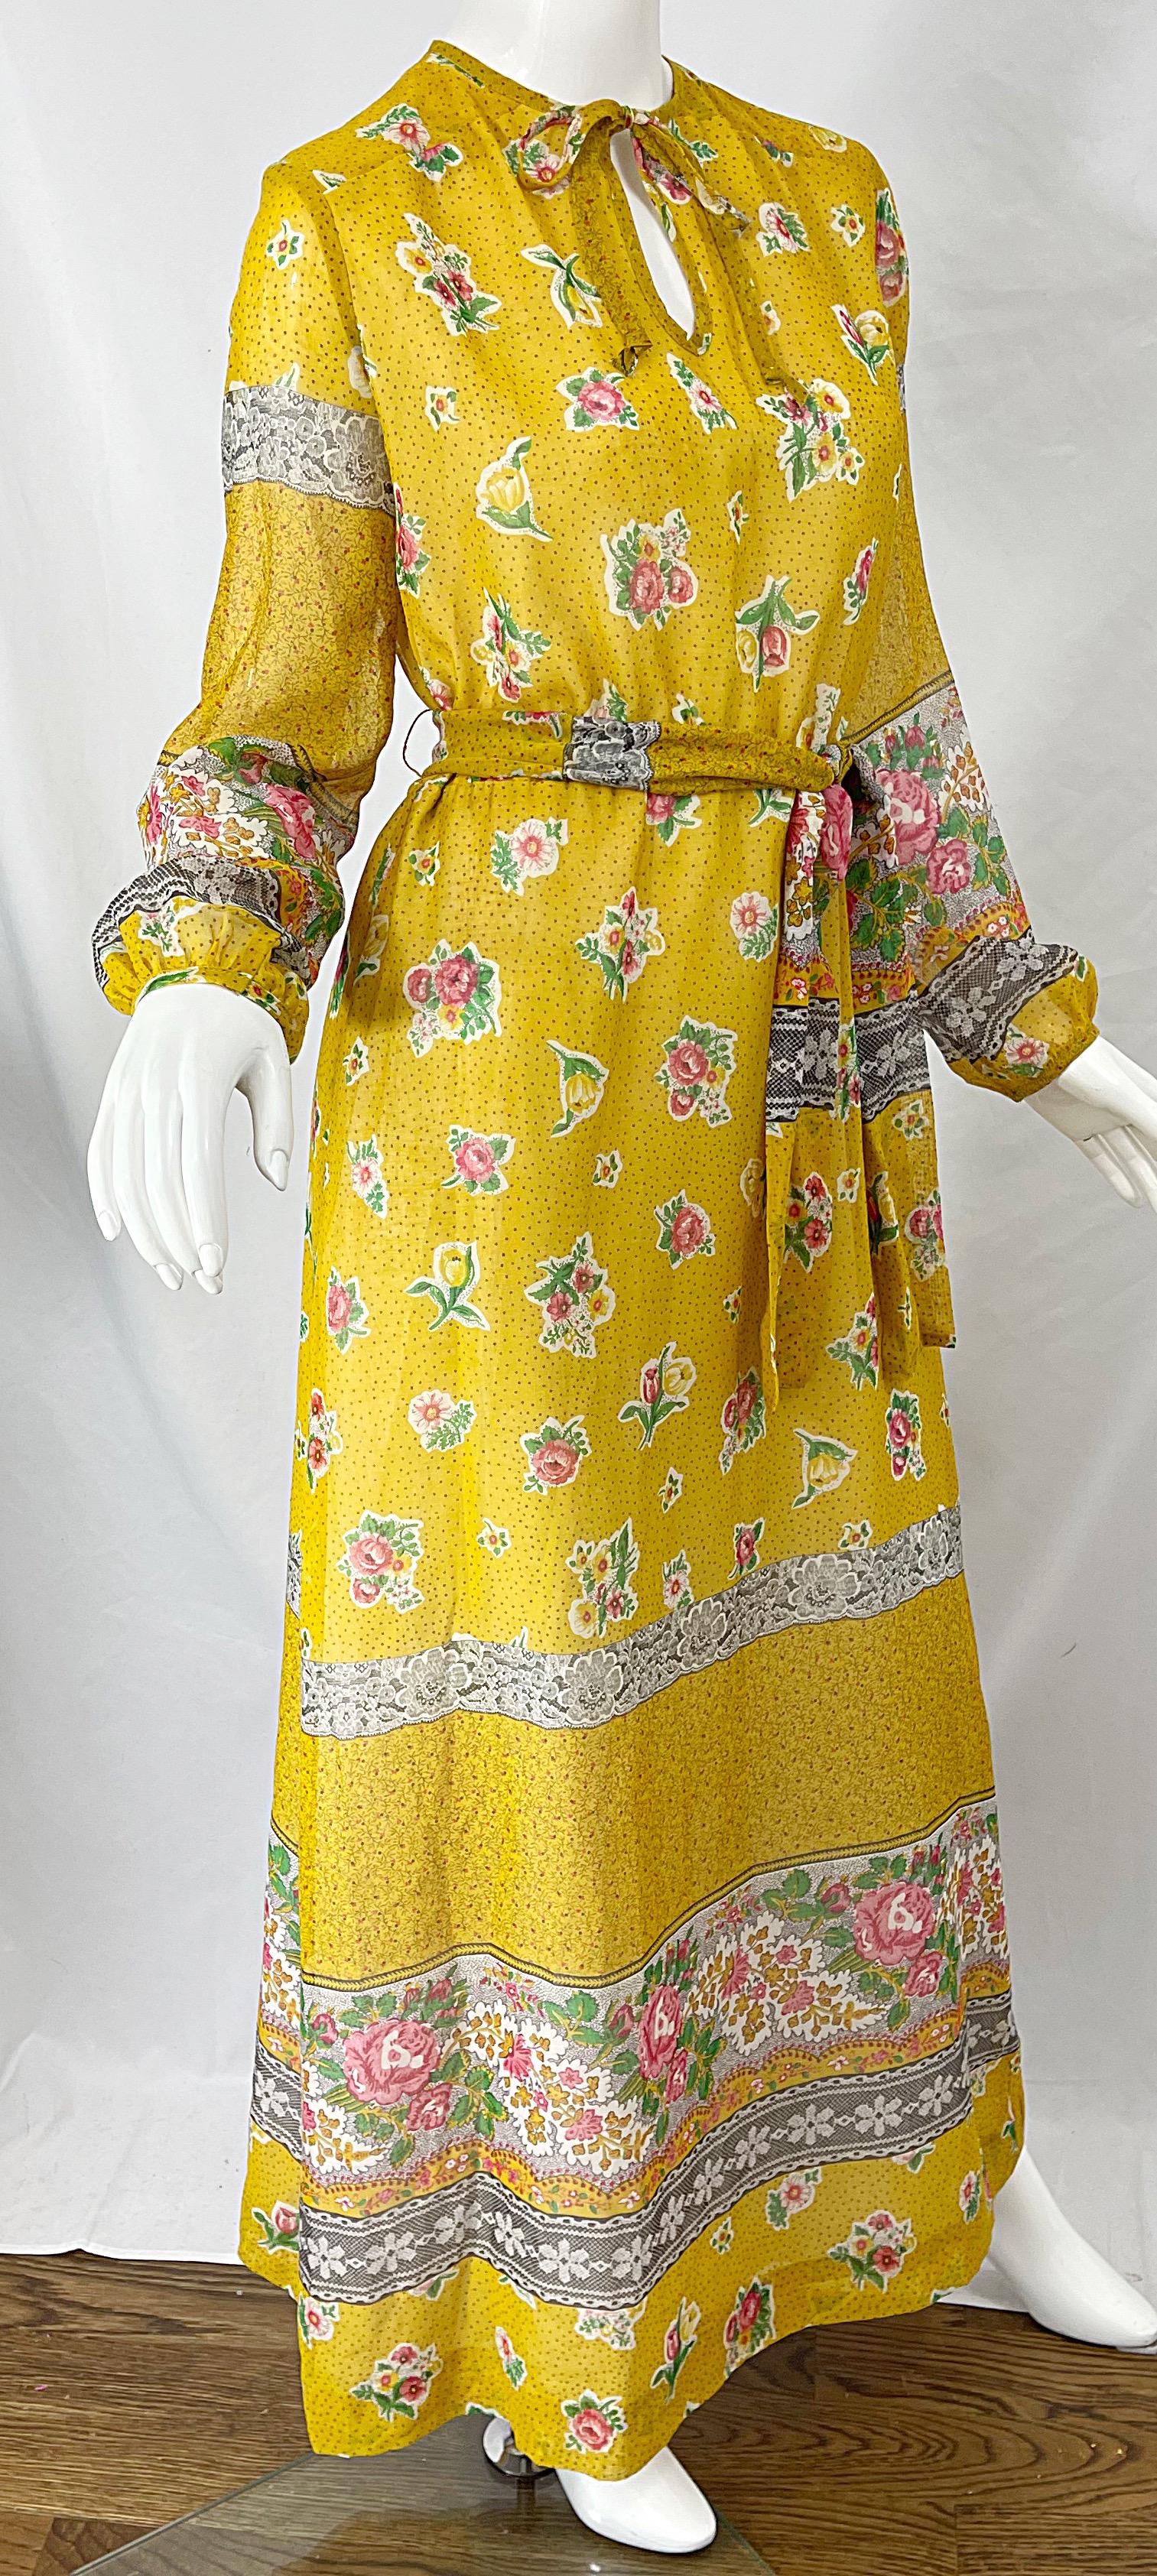 1970s Gay Gibson Trompe L’Oeil Lace Print Yellow Cotton Voile 70s Maxi Dress For Sale 10